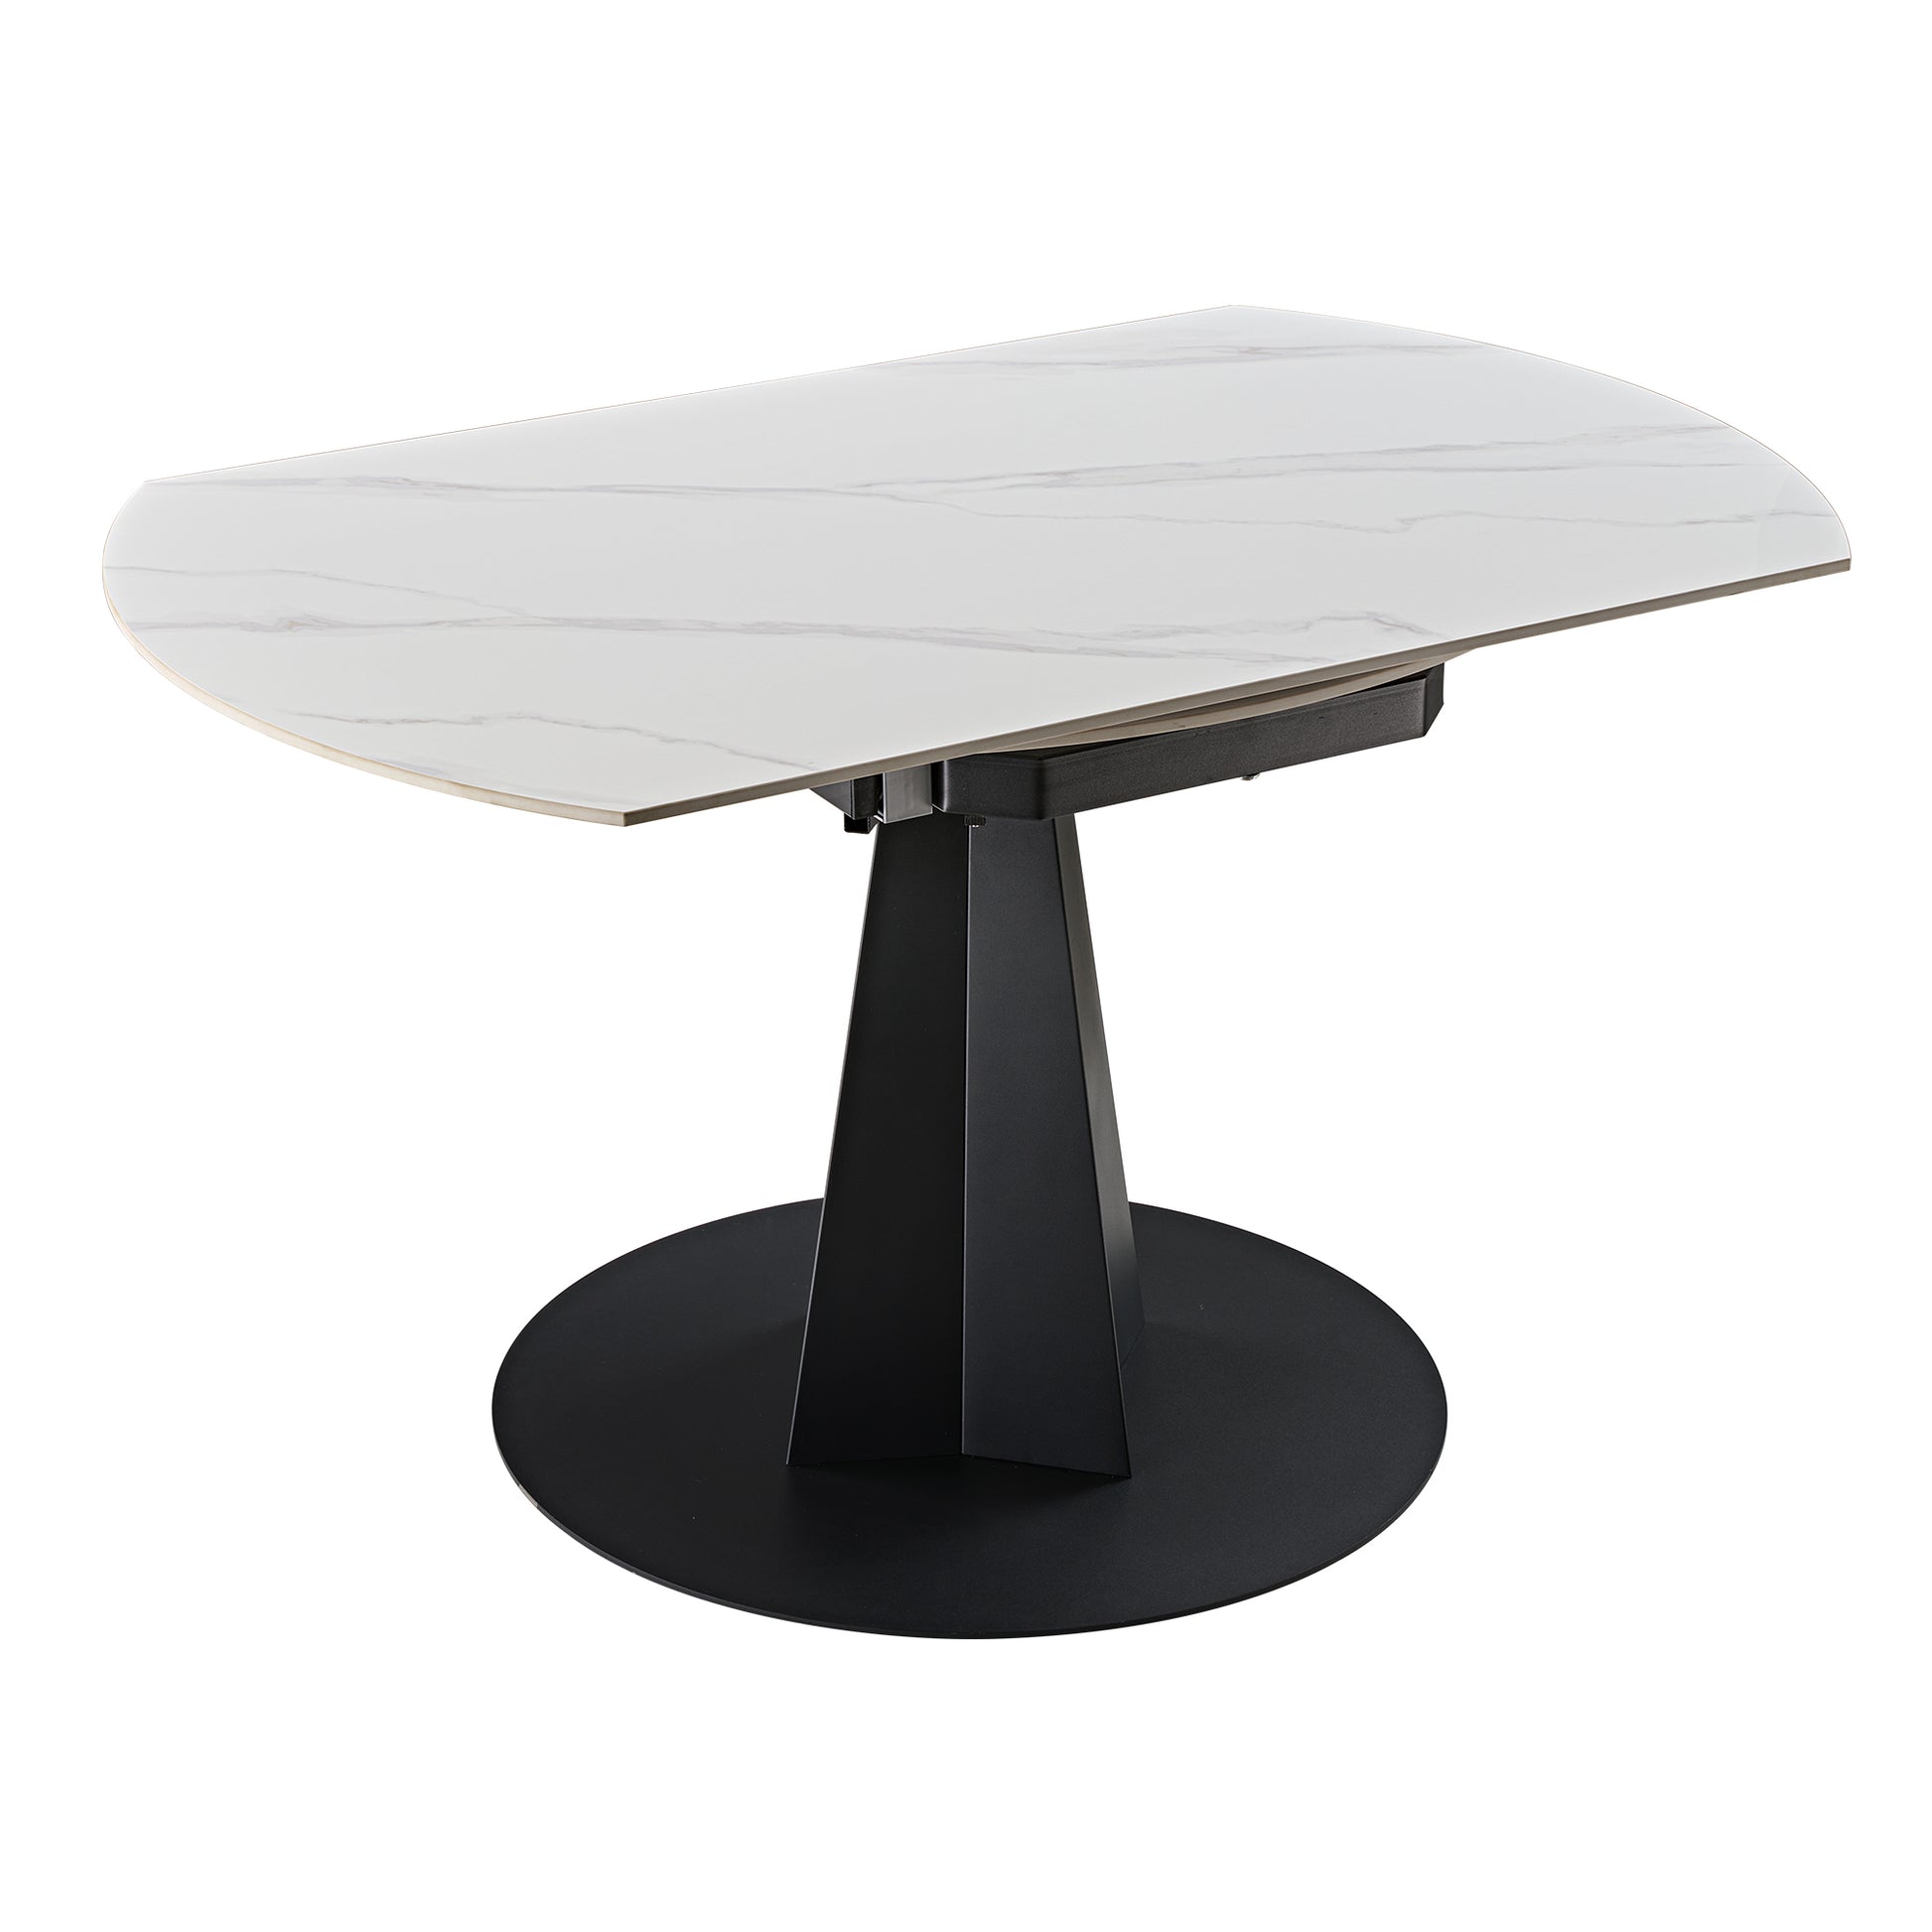 53 inch White Round Extending Dining Table with Black Base, Product Image Retracted